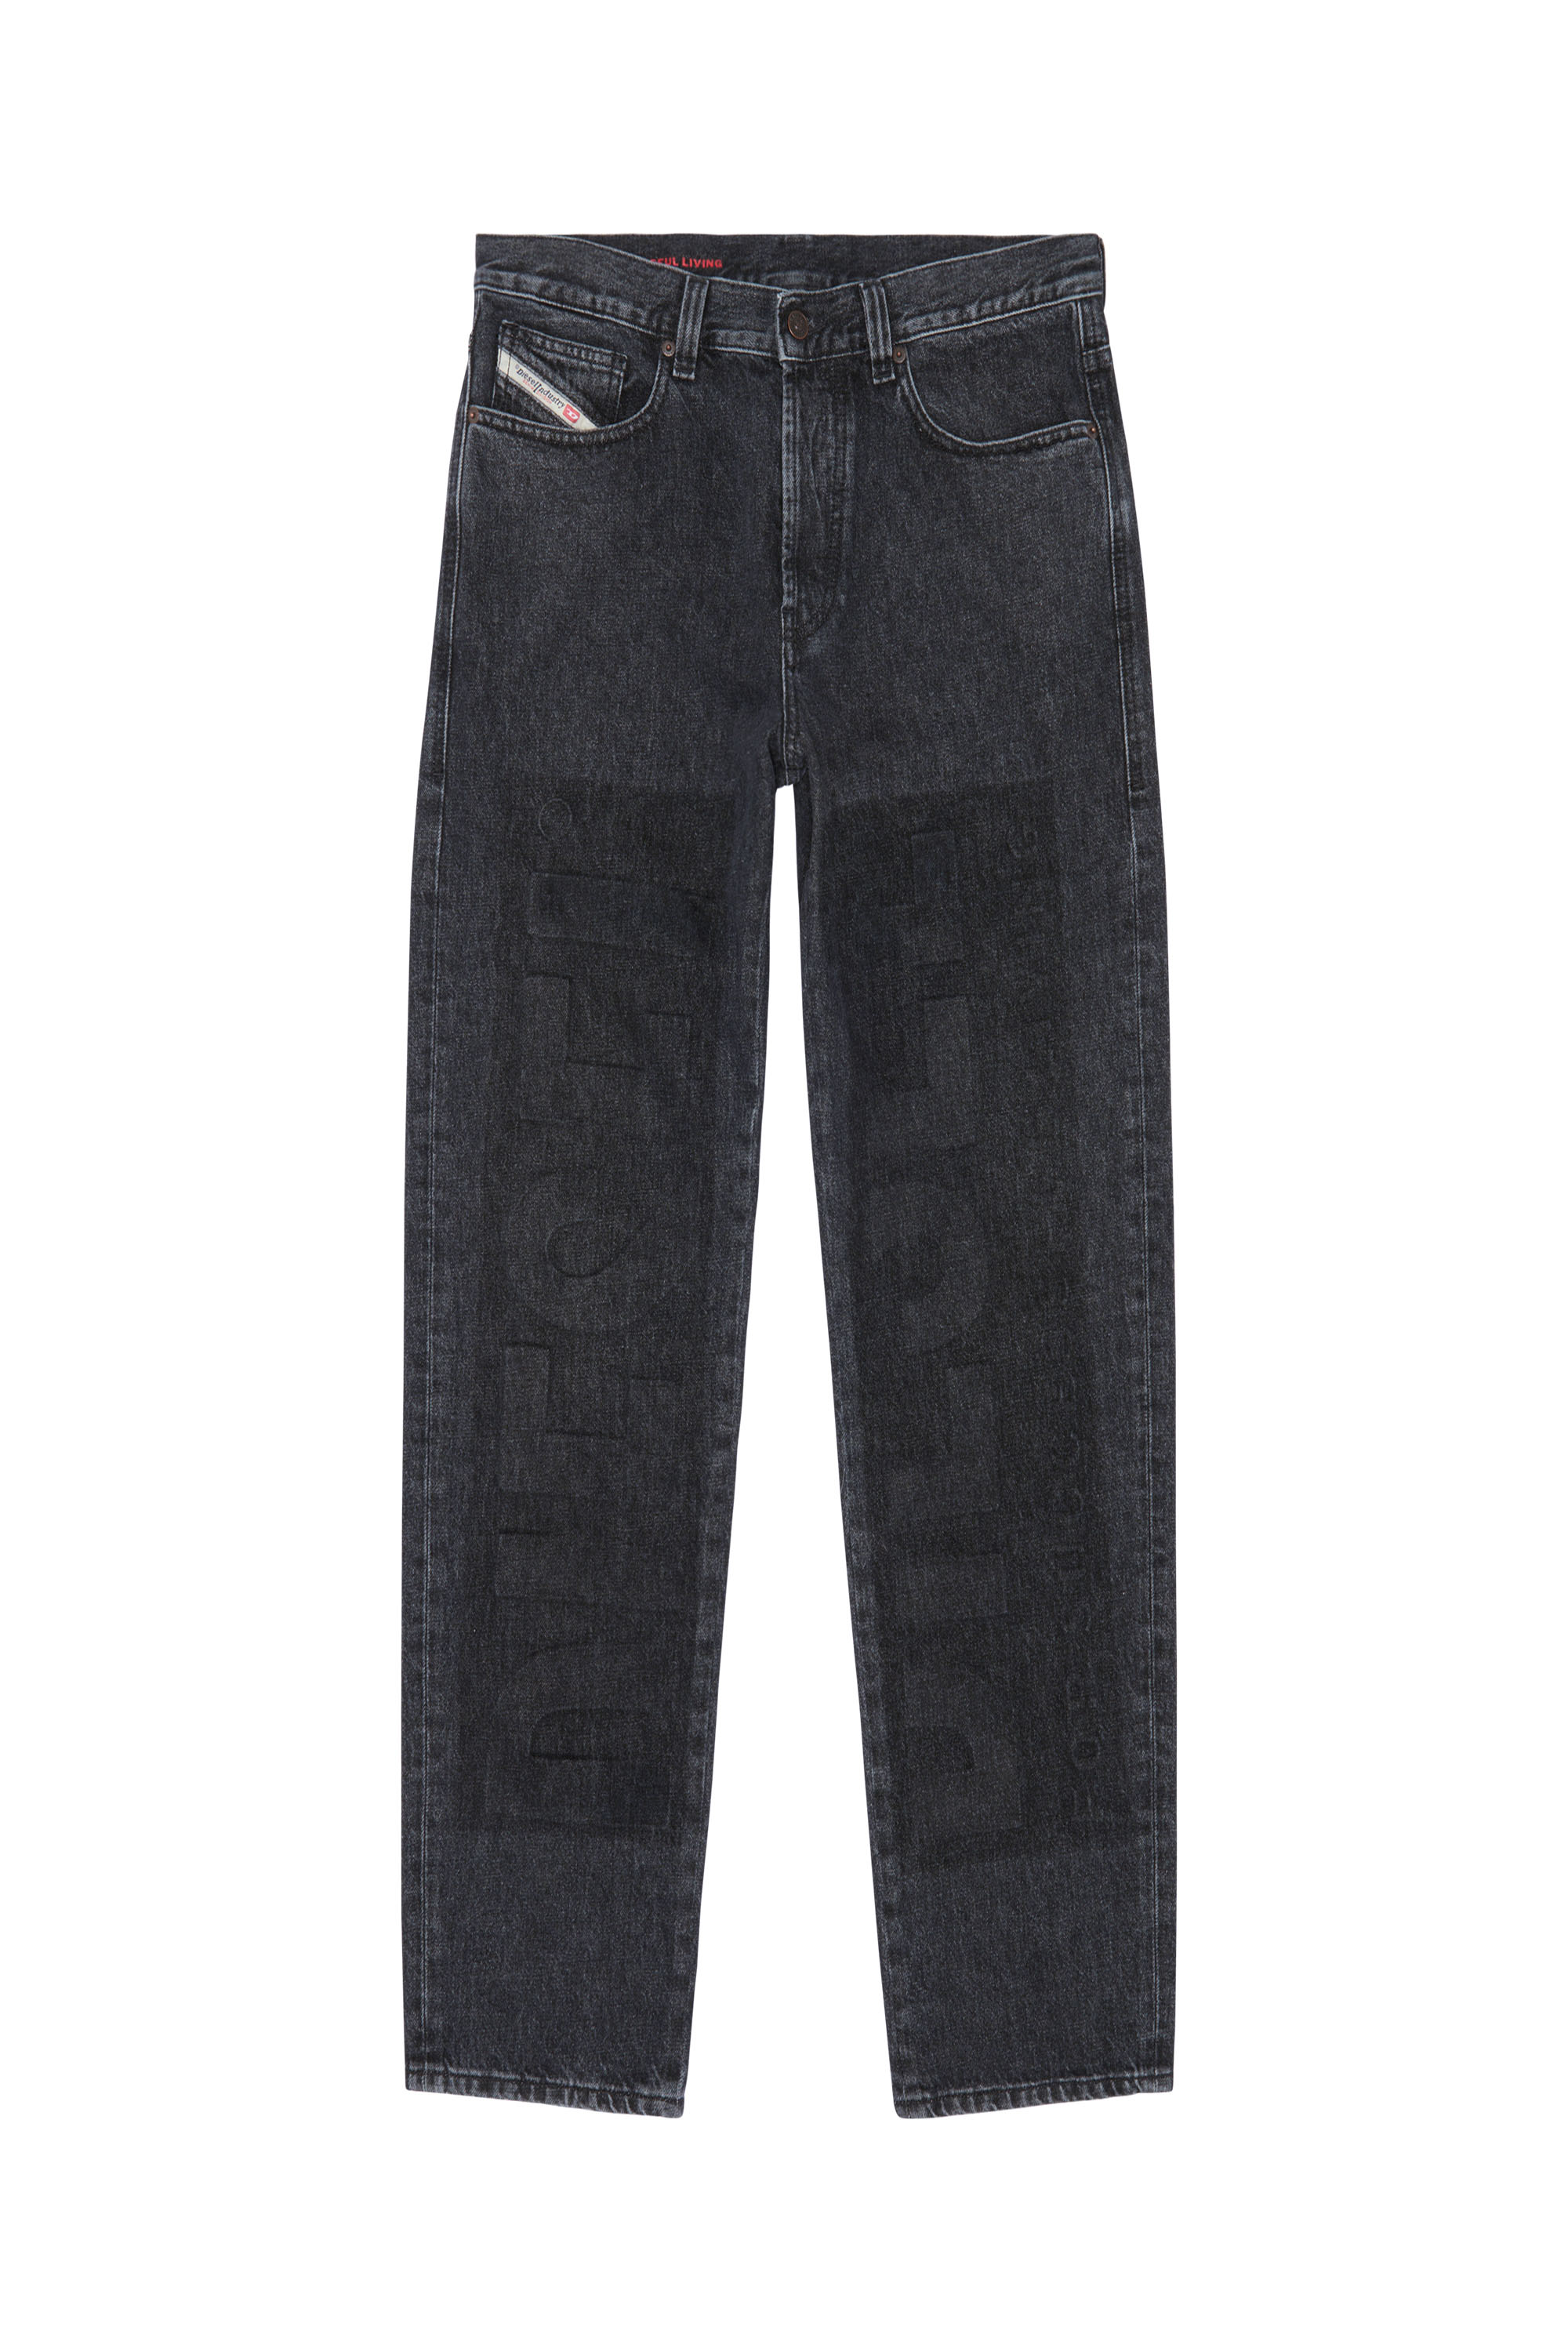 Diesel - 2010 007C5 Straight Jeans, Negro/Gris oscuro - Image 6